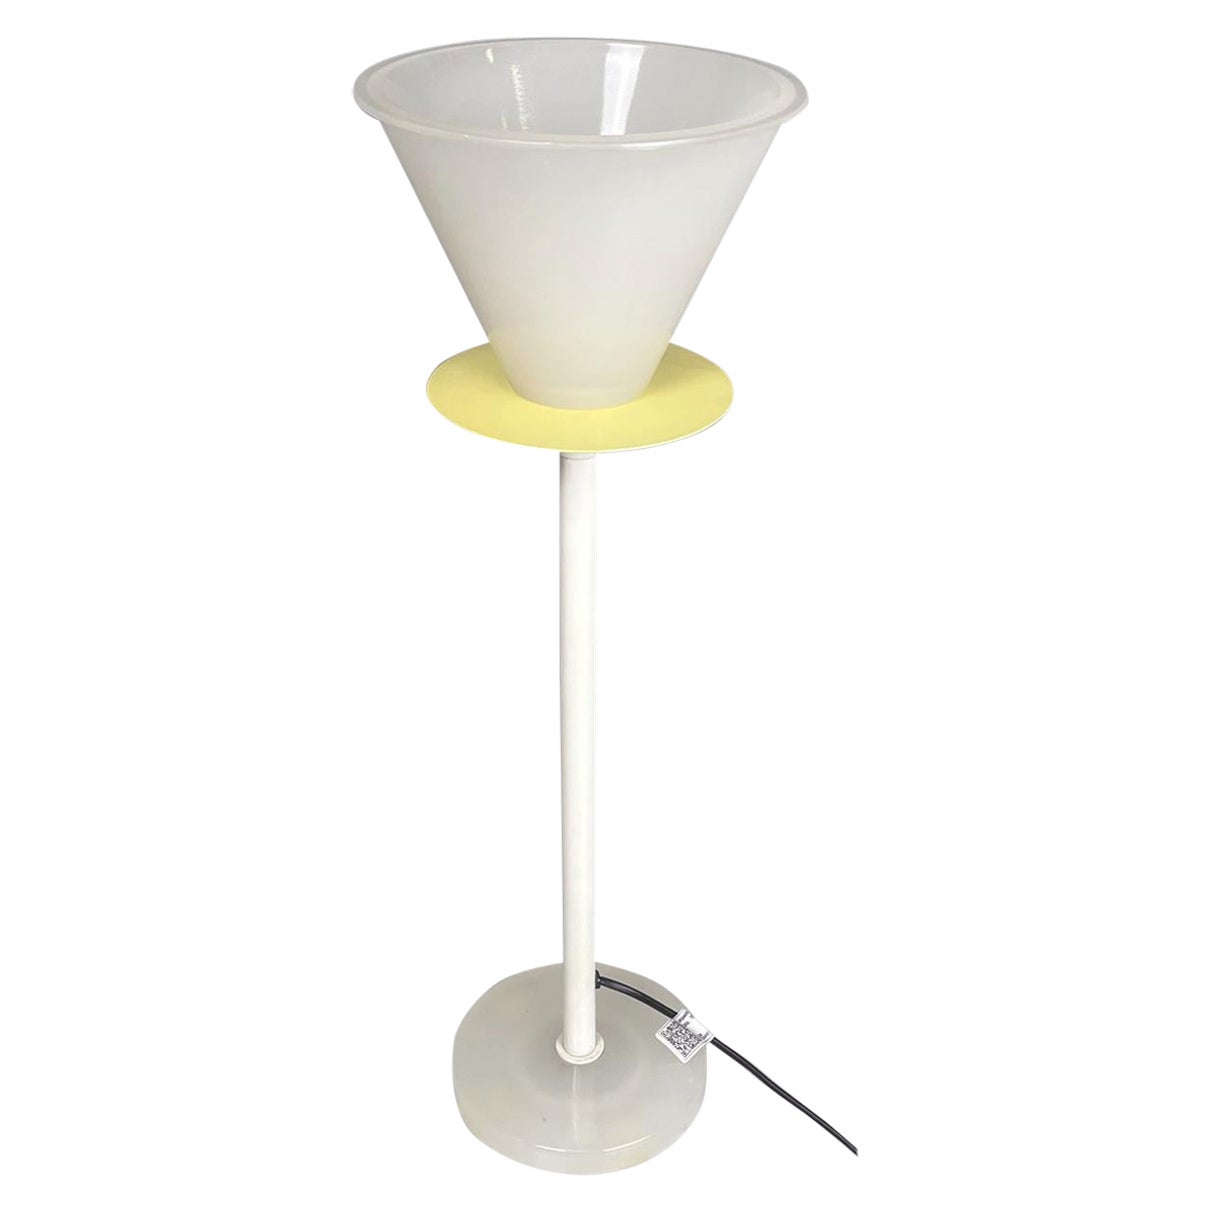 Italian modern table lamp in Murano glass and whit and yellow metal, 1980s